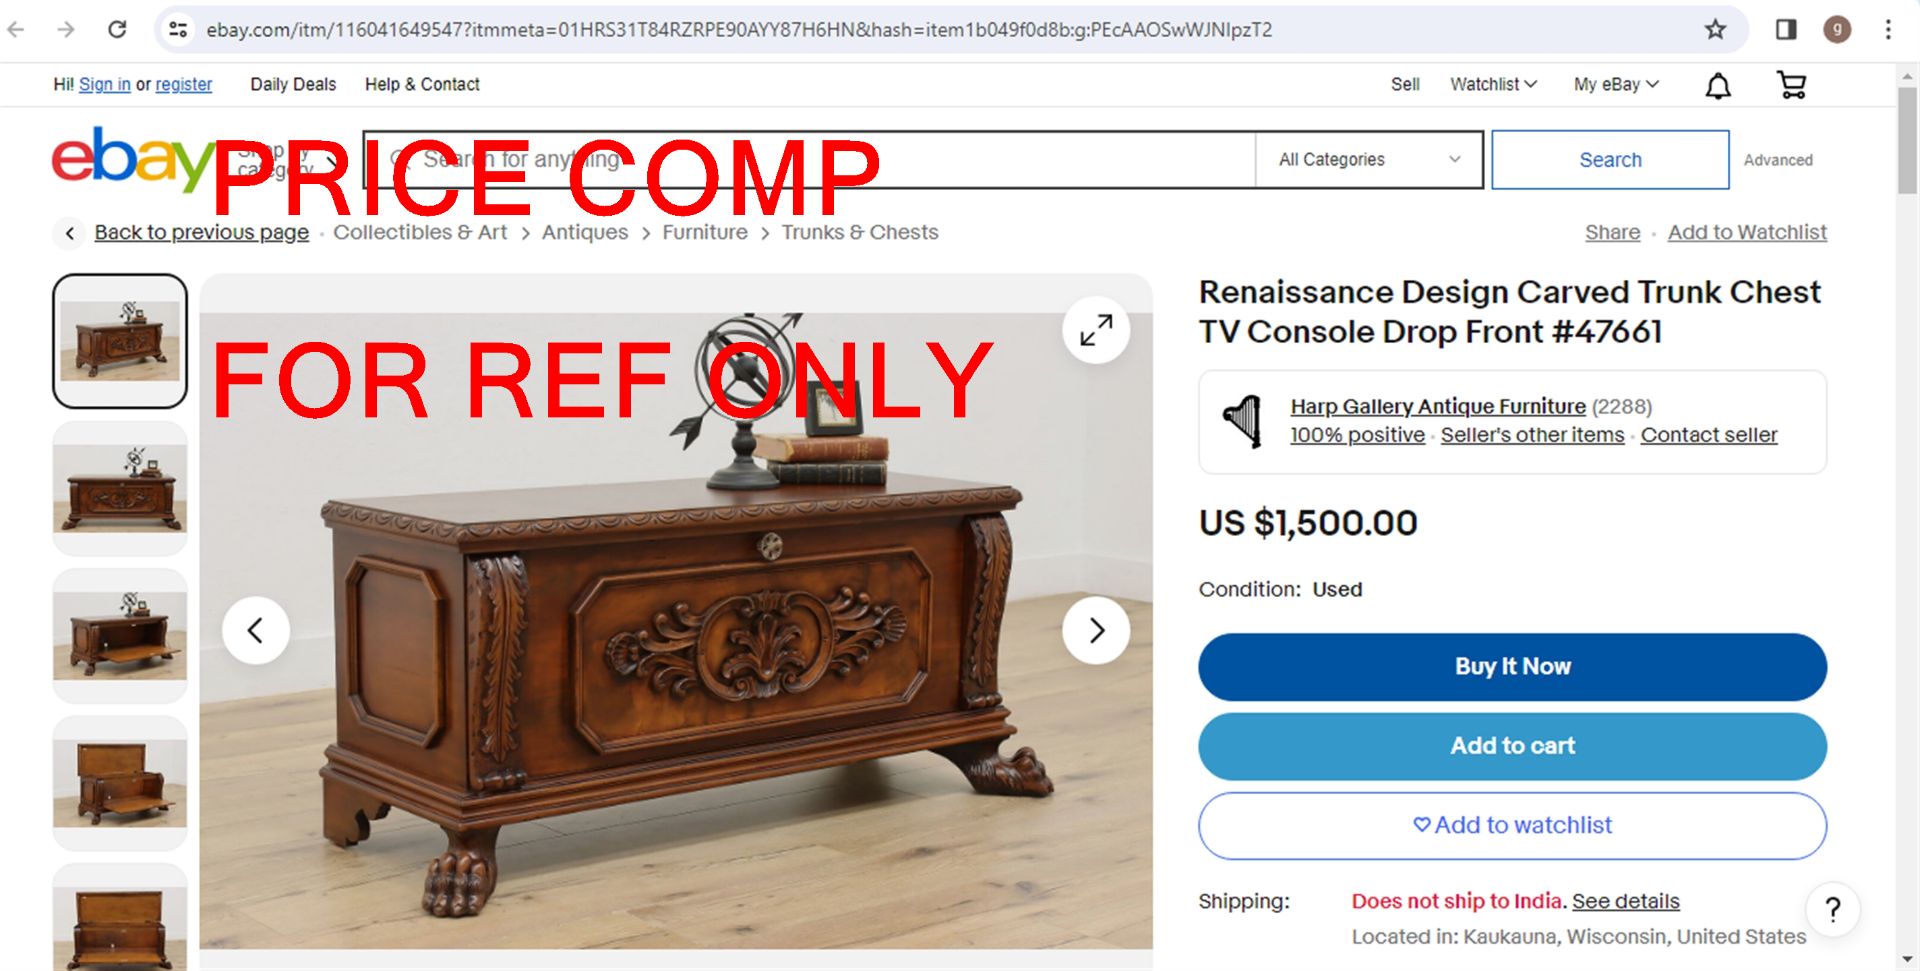 Cool Old Furniture- (LOADING FEE - $25) - Image 8 of 9